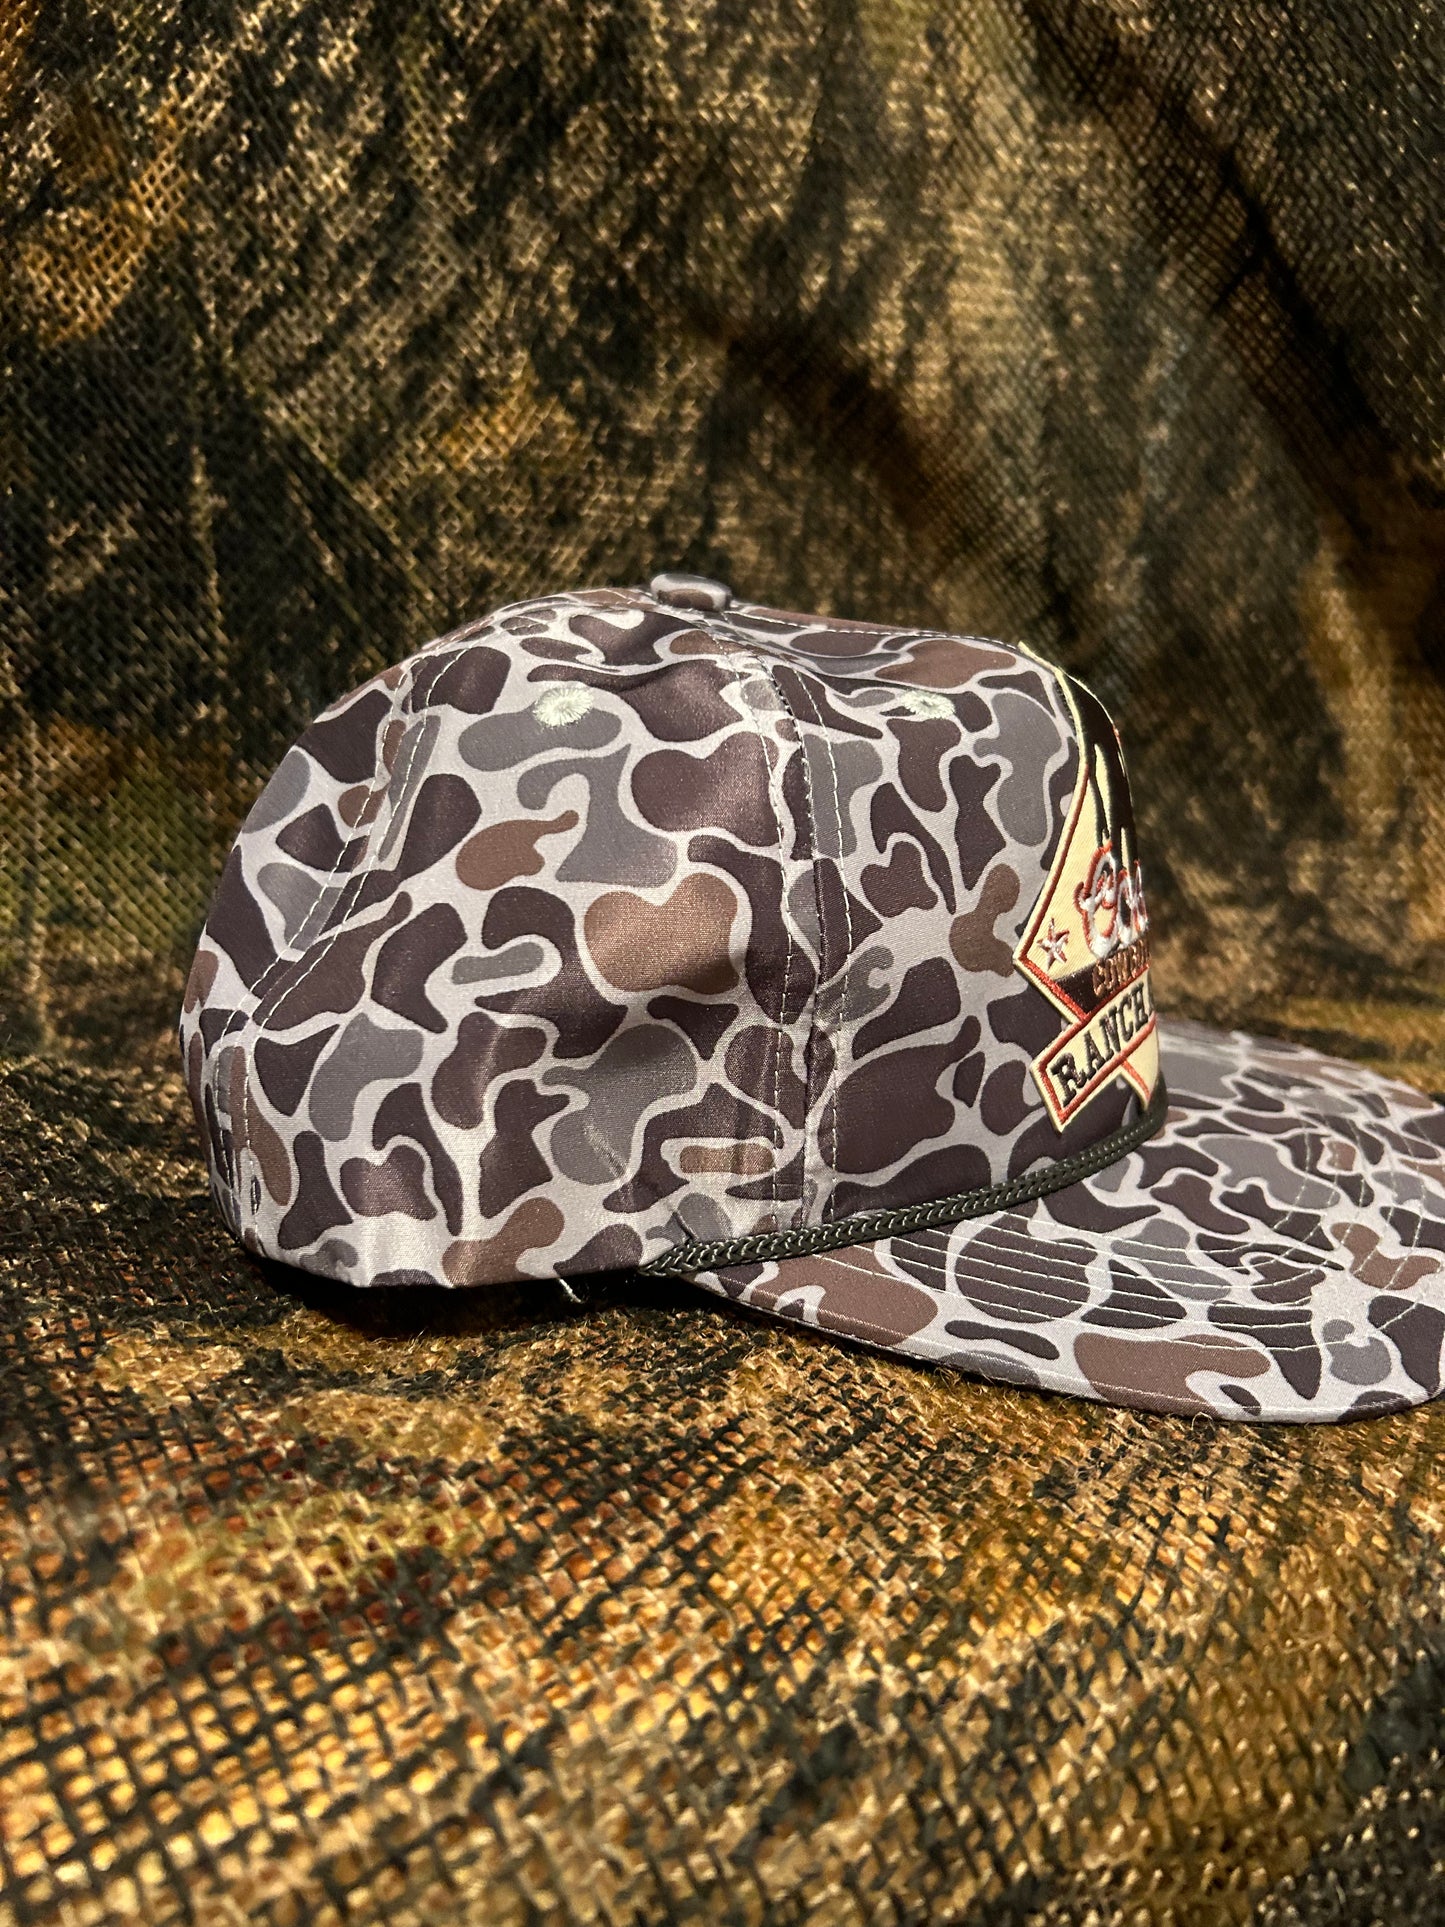 Coors Cowboy ranch rodeo patch on a Smokeshow Camo ropebrim snapback hat